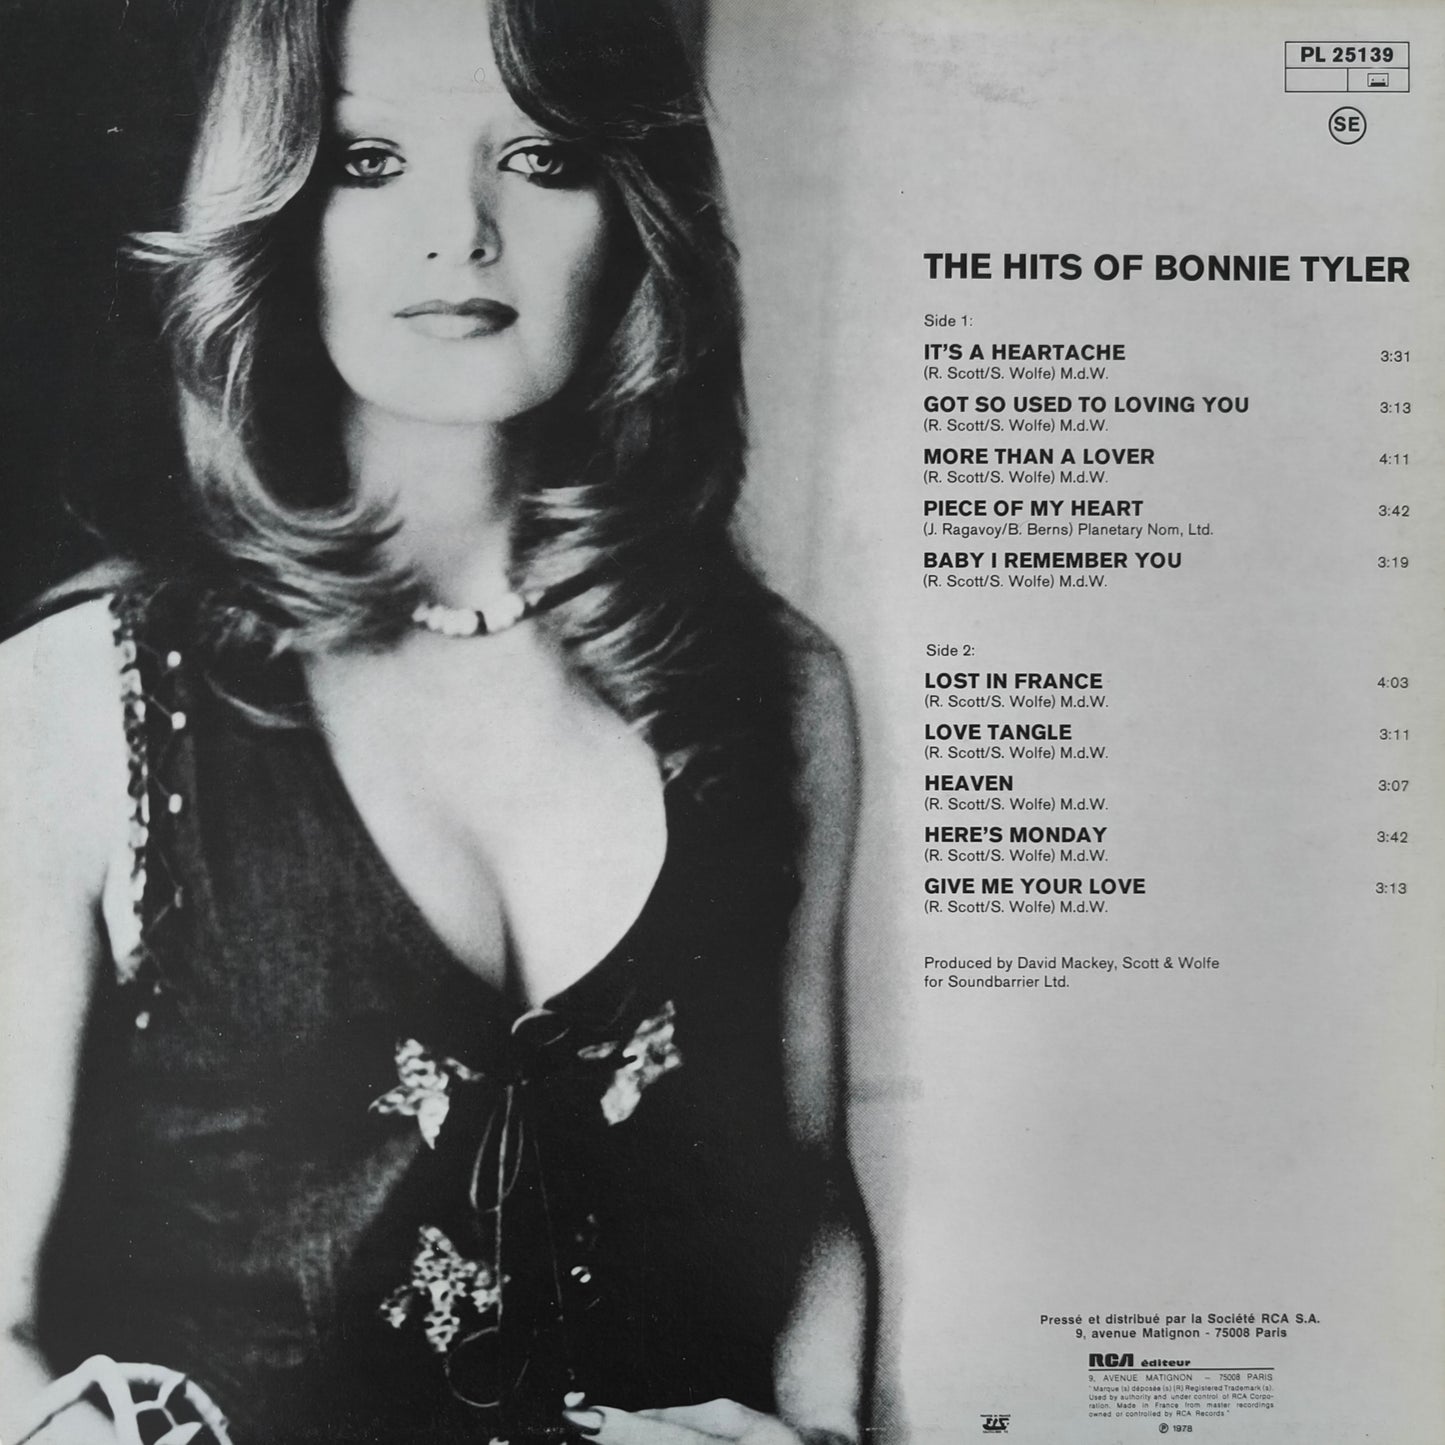 BONNIE TYLER - The Hits Of Bonnie Tyler